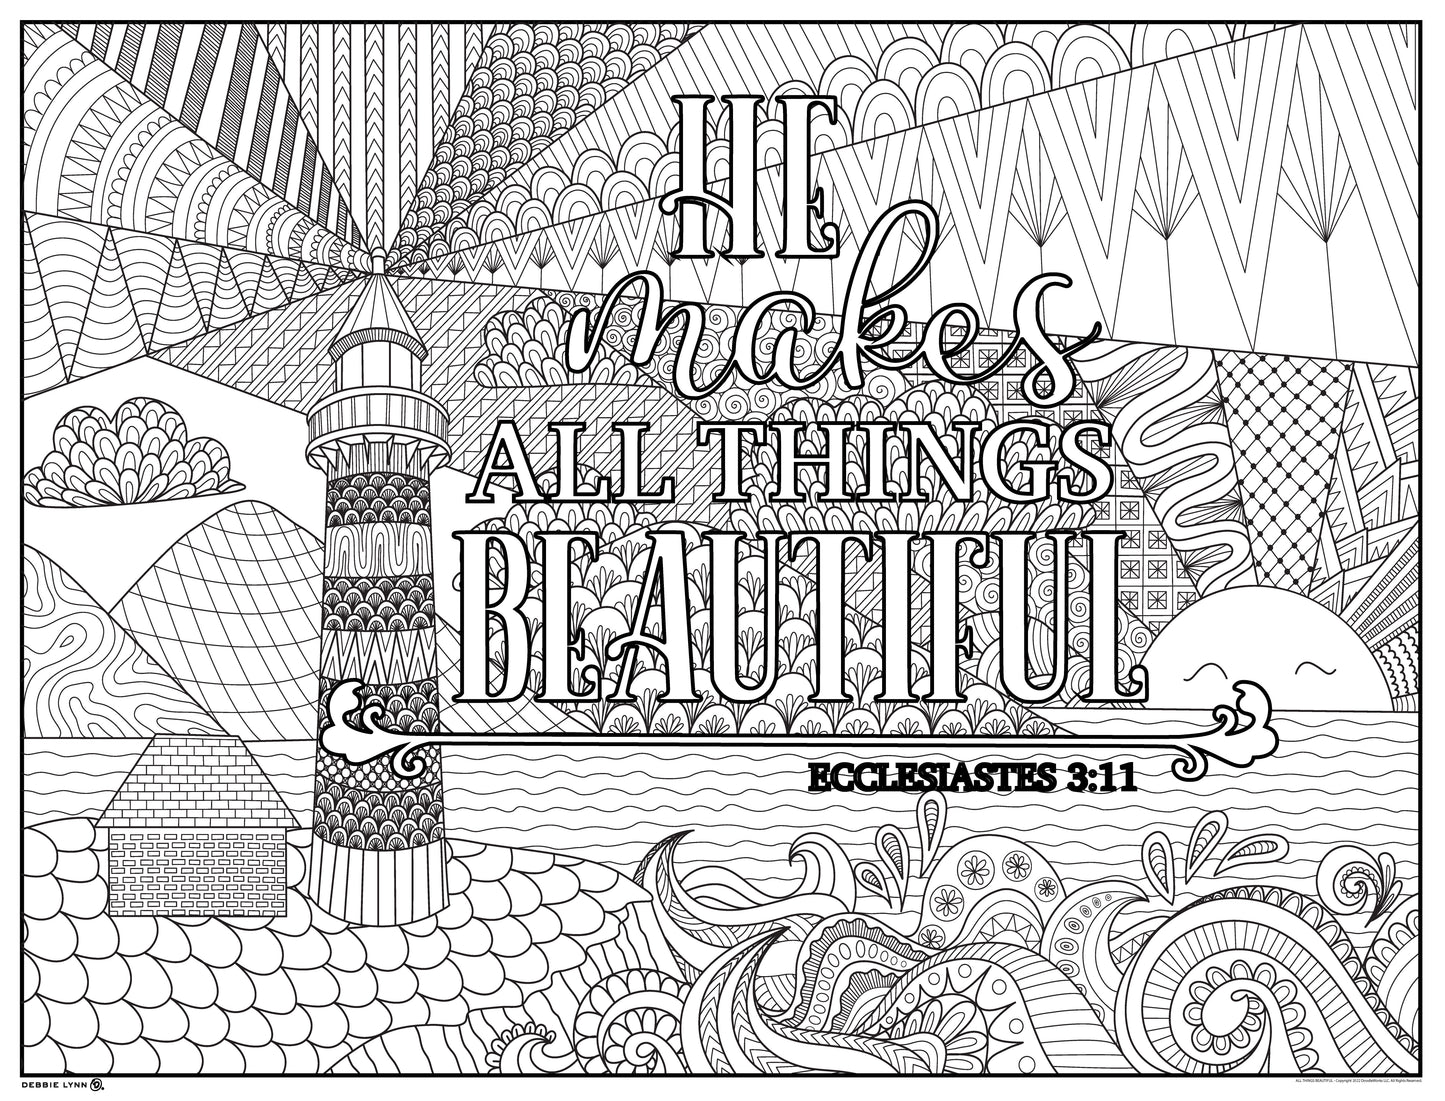 All Things Beautiful Faith Personalized Giant Coloring Poster 46"x60"